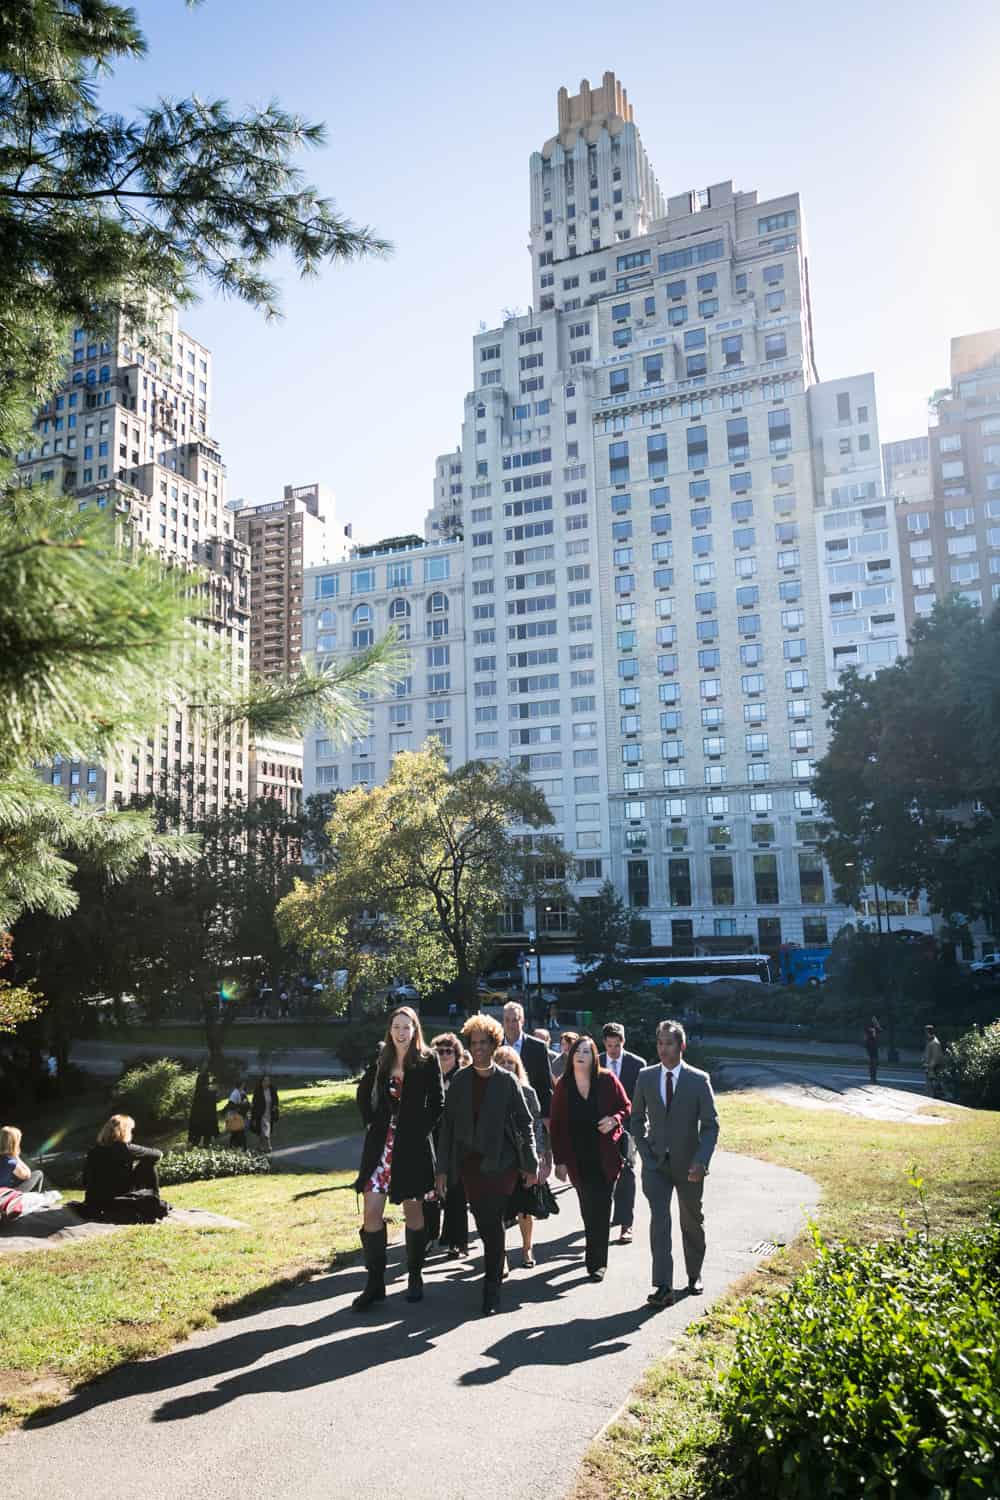 Guests walking up pathway with NYC skyline in background for an article on Central Park wedding planning tips